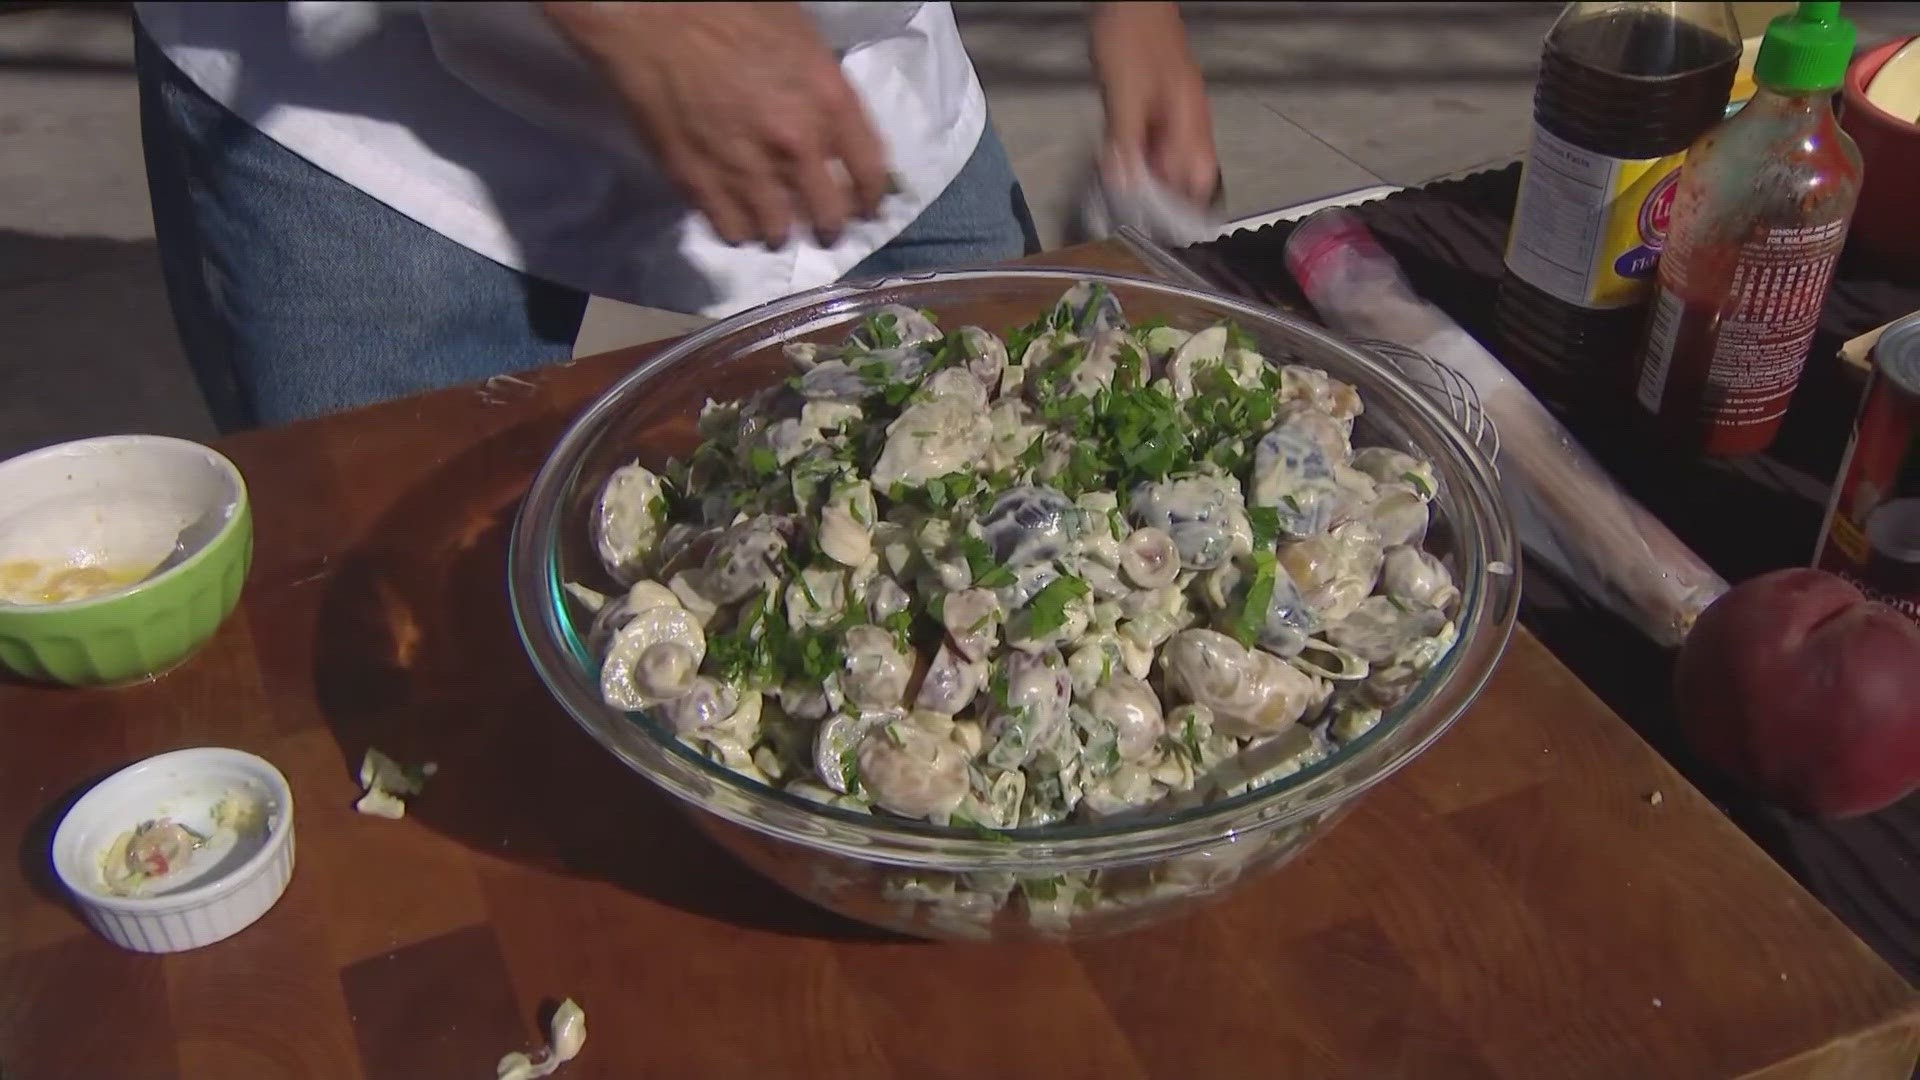 In this special edition of Grilling with Styles, Shawn takes over the CBS 8 Backlot to showcase his three-course Labor Day menu.